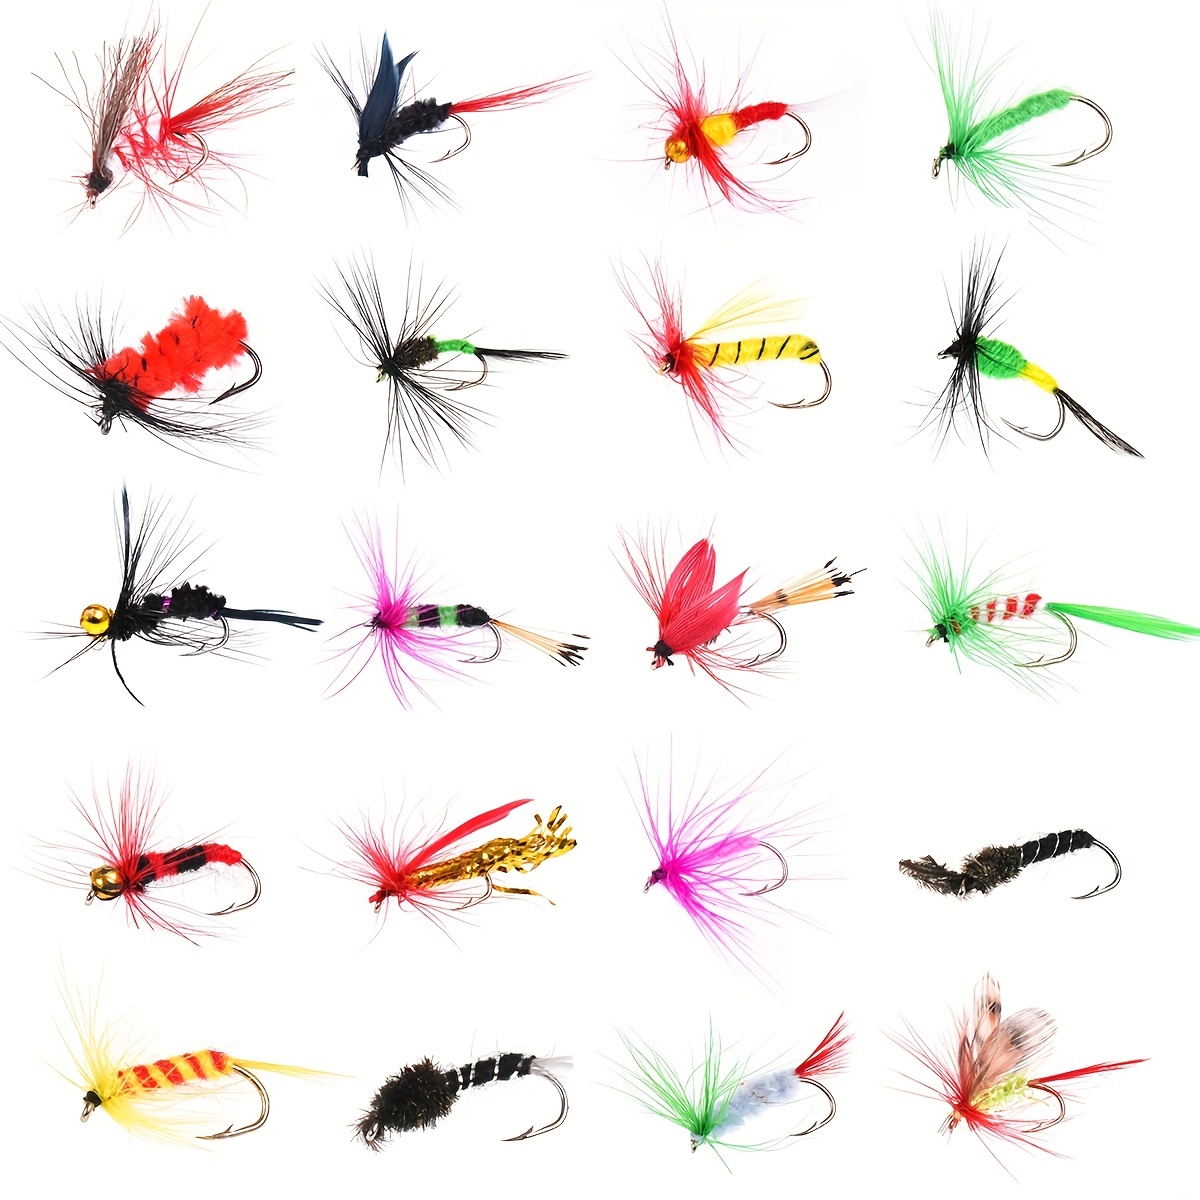 MNFT Handmade Fly Fishing Flies Kit 40/Dry Wet Nymph Micro Fishing Lures  For Bass, Trout, And Salmon Bait From Daye09, $10.44